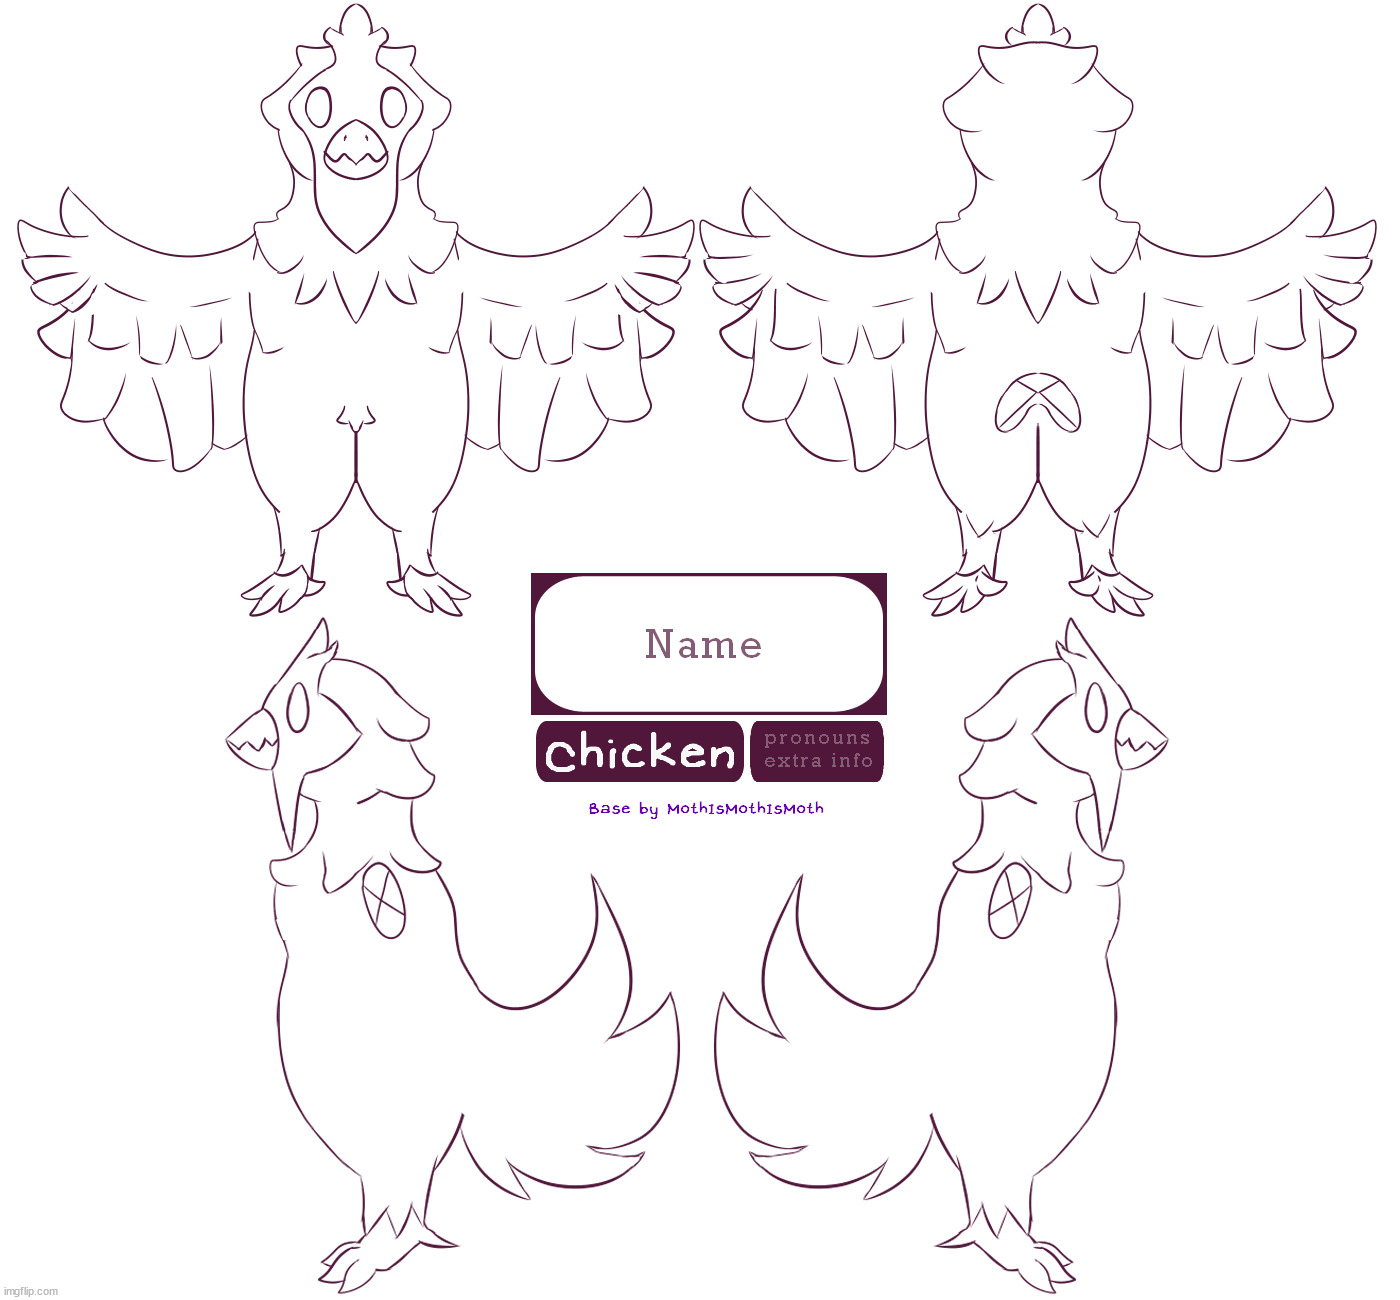 F2U chicken base I made - enjoy ^w^ (I really hope more ppl make chicken sonas- I love chickens) | image tagged in furry,free stuff,chickens,chicken,art,drawings | made w/ Imgflip meme maker